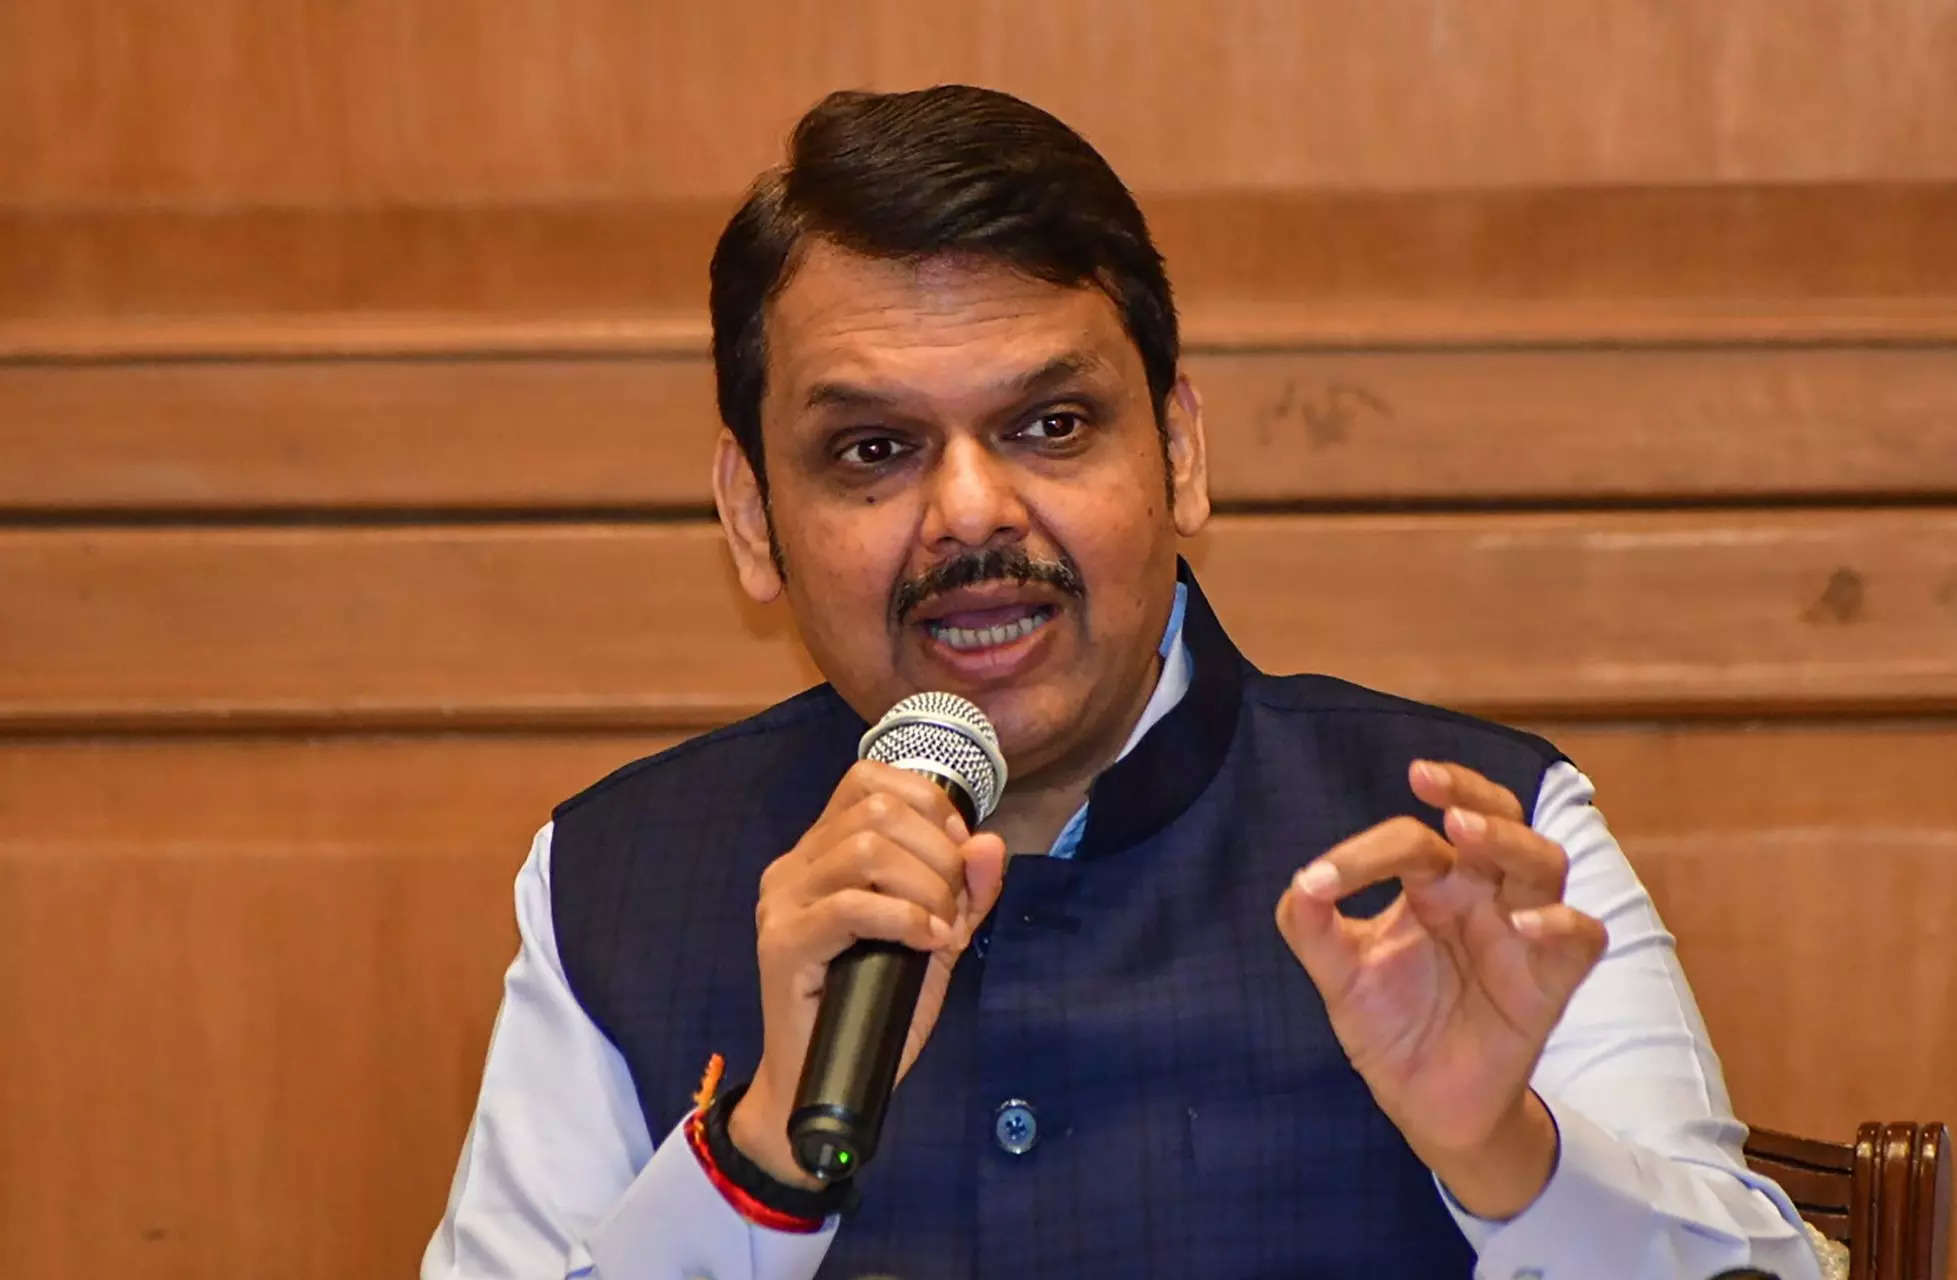 Put aside other issues, vote for PM Modi as he got COVID vaccines for us during pandemic: Devendra Fadnavis 